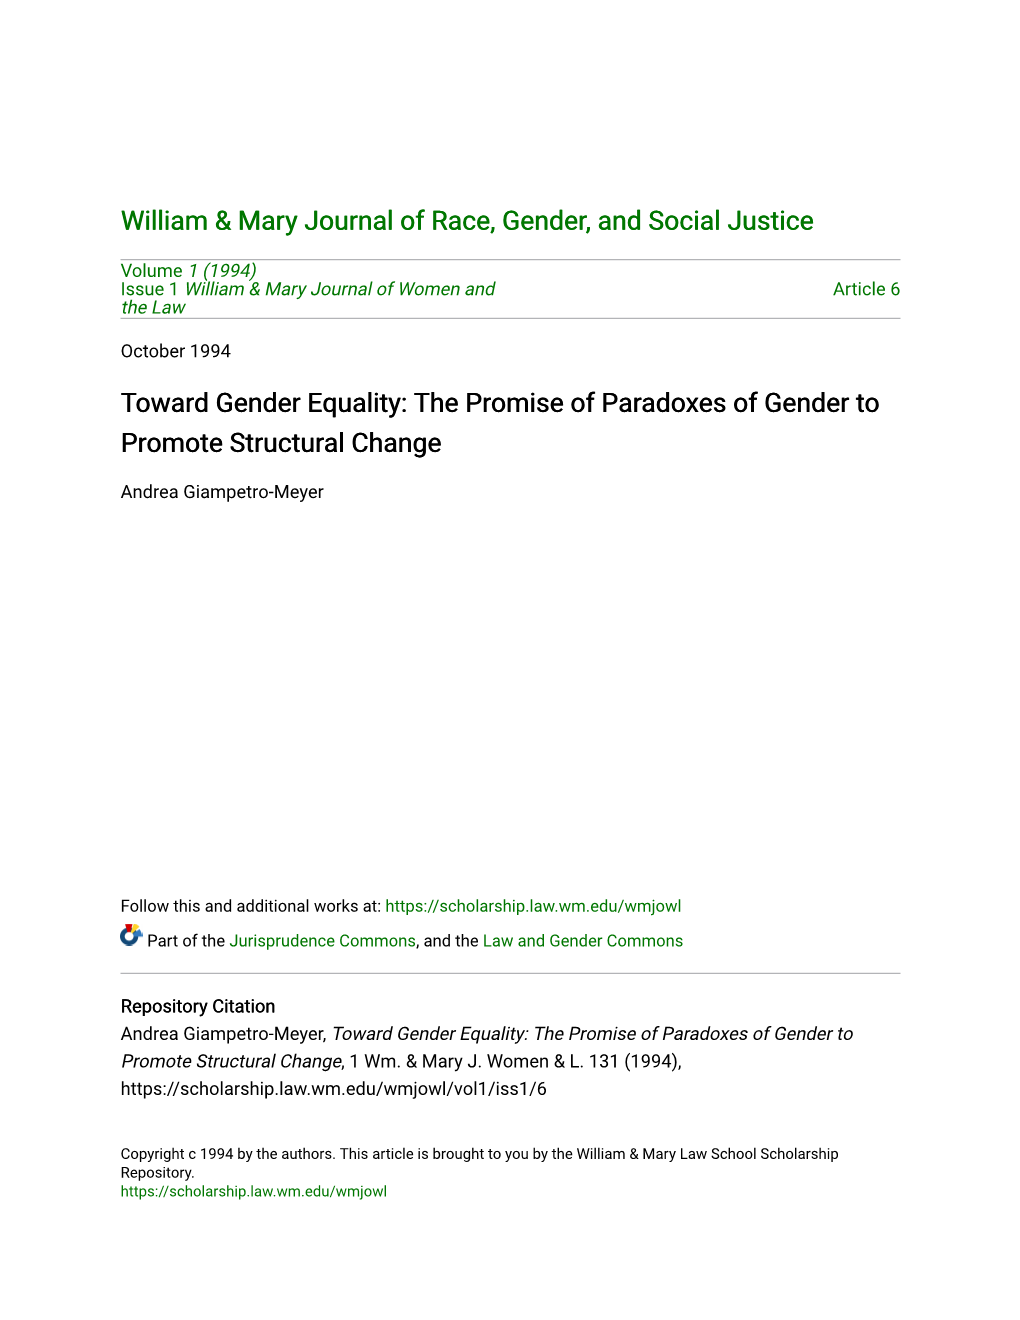 Toward Gender Equality: the Promise of Paradoxes of Gender to Promote Structural Change